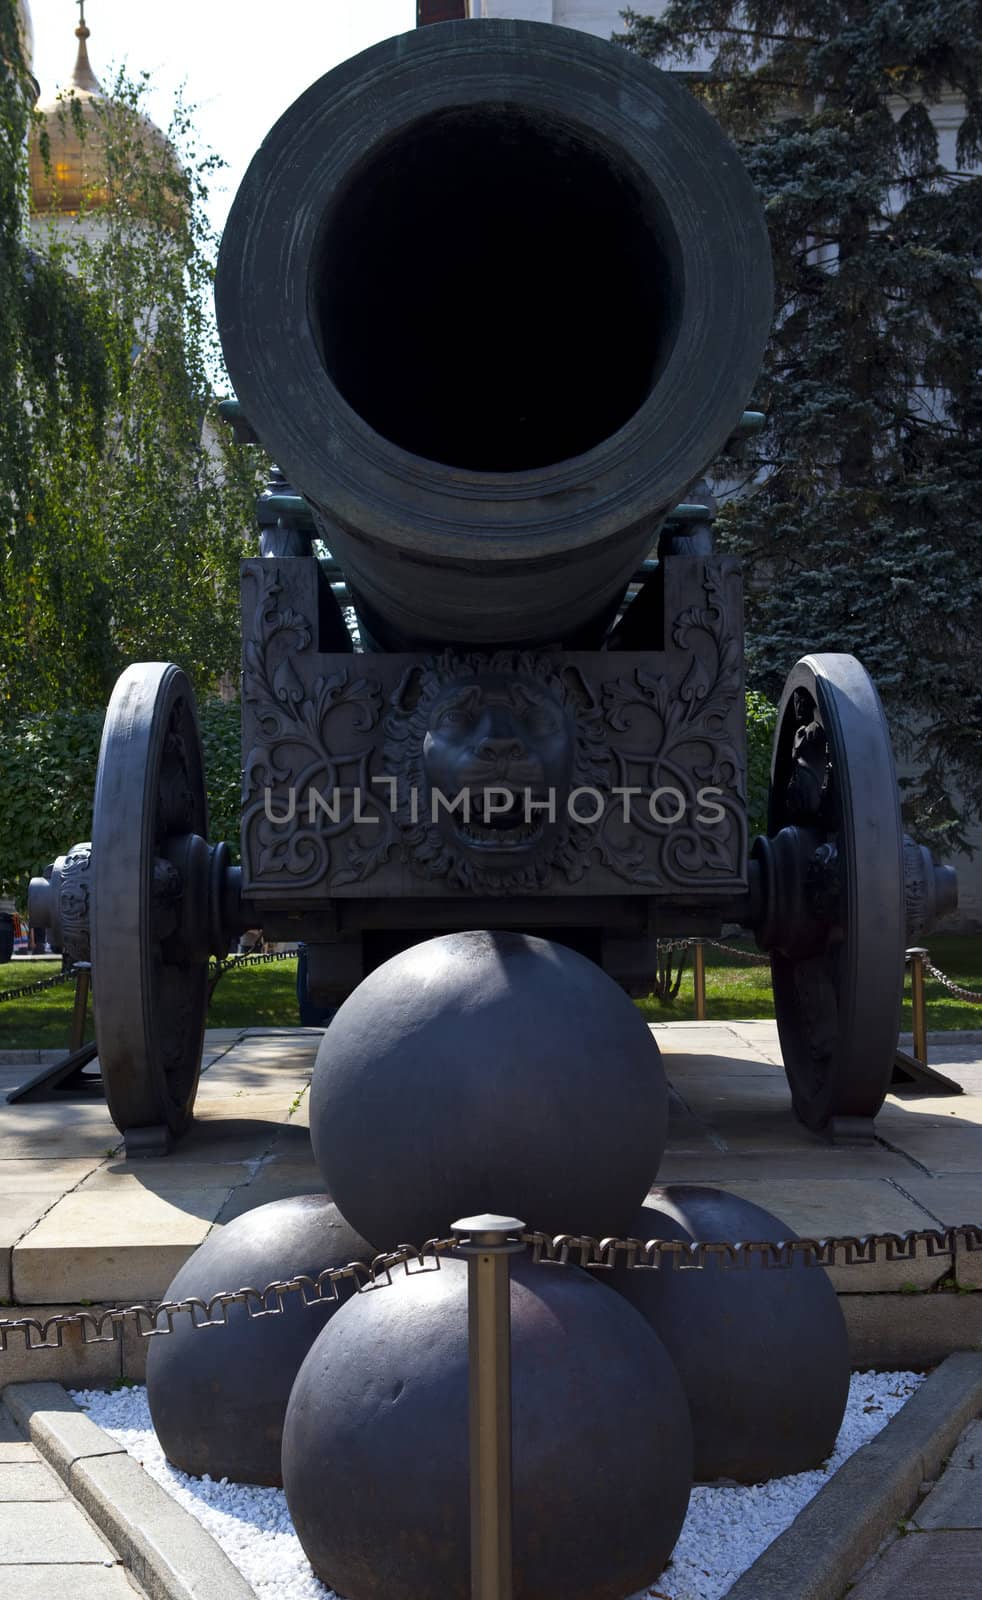 Tsar Cannon at the Kremlin in Russia.